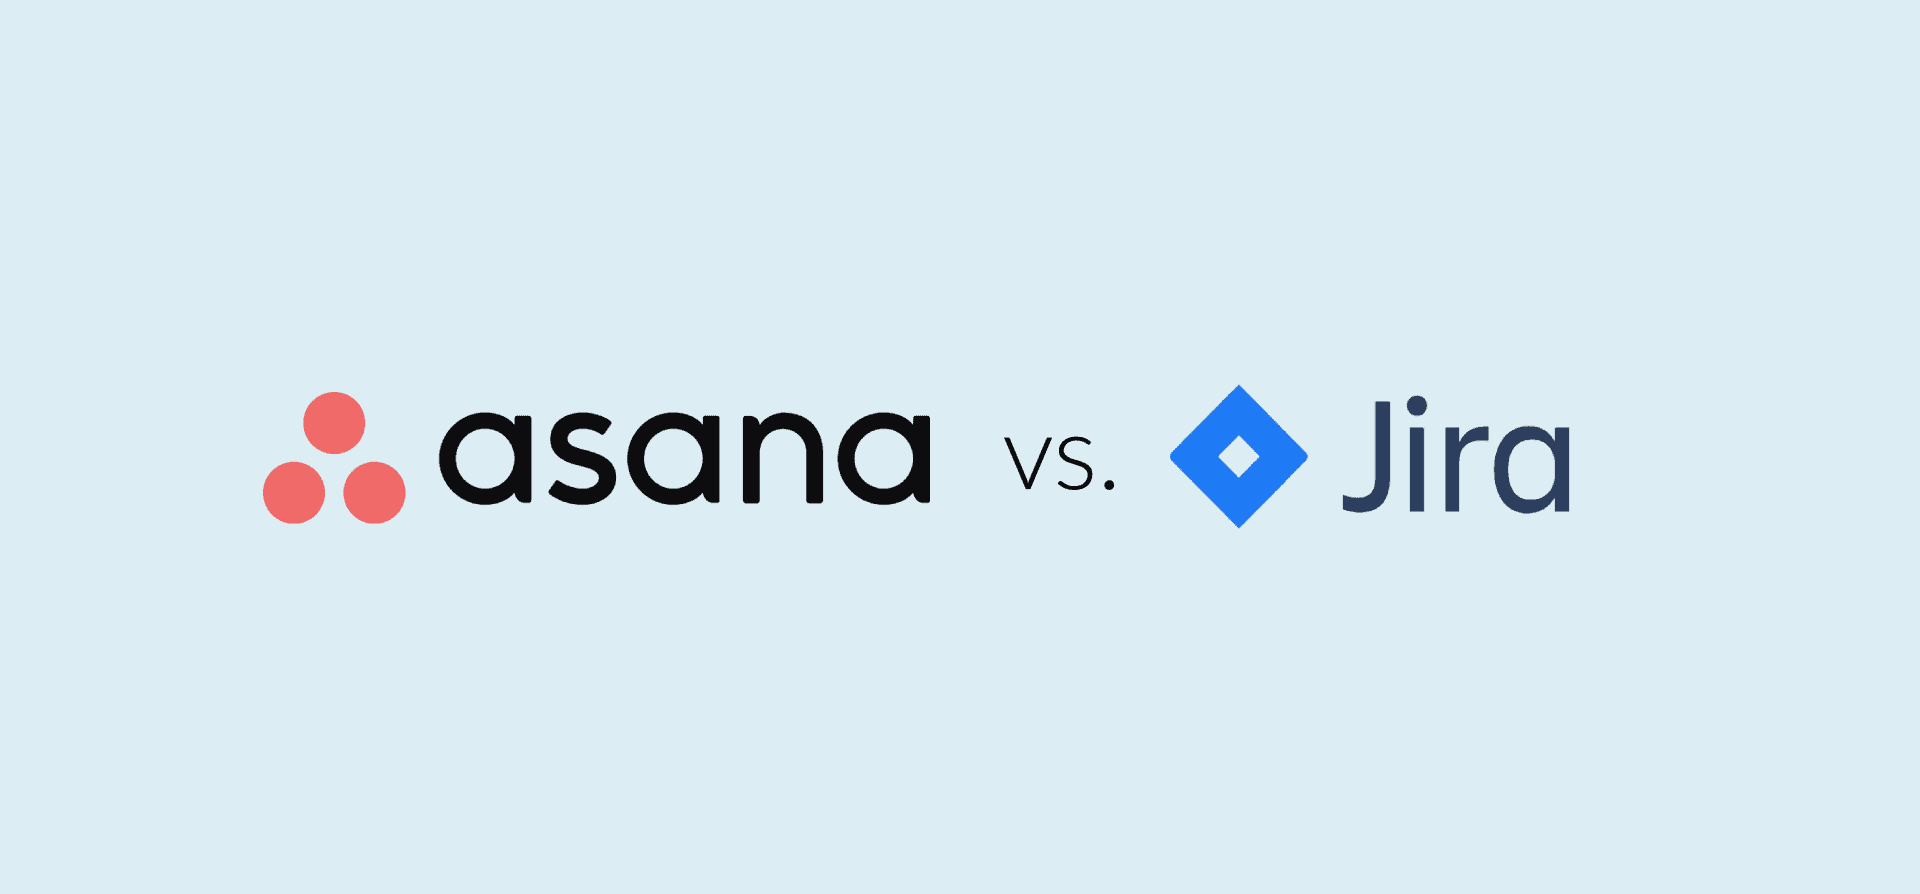 Logos for Asana and Jira, representing the breakdown of one tool vs. the other